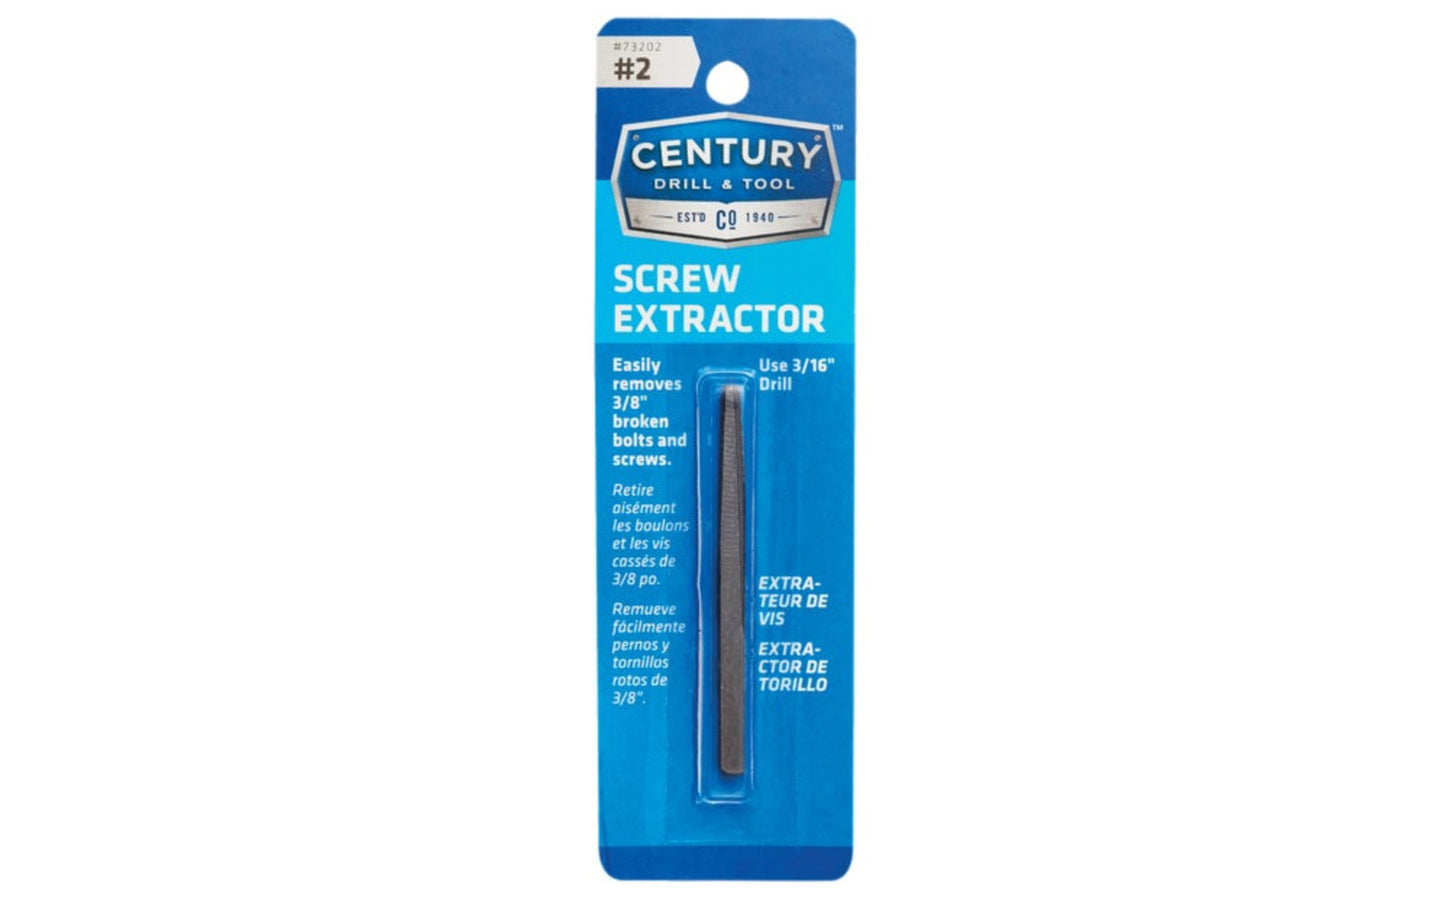 A Straight Flute Screw Extractor made by Century Drill & Tool. Remove broken bolts & screws with these square shaft extractors. Ideal for thin wall extractions. #2 size. 